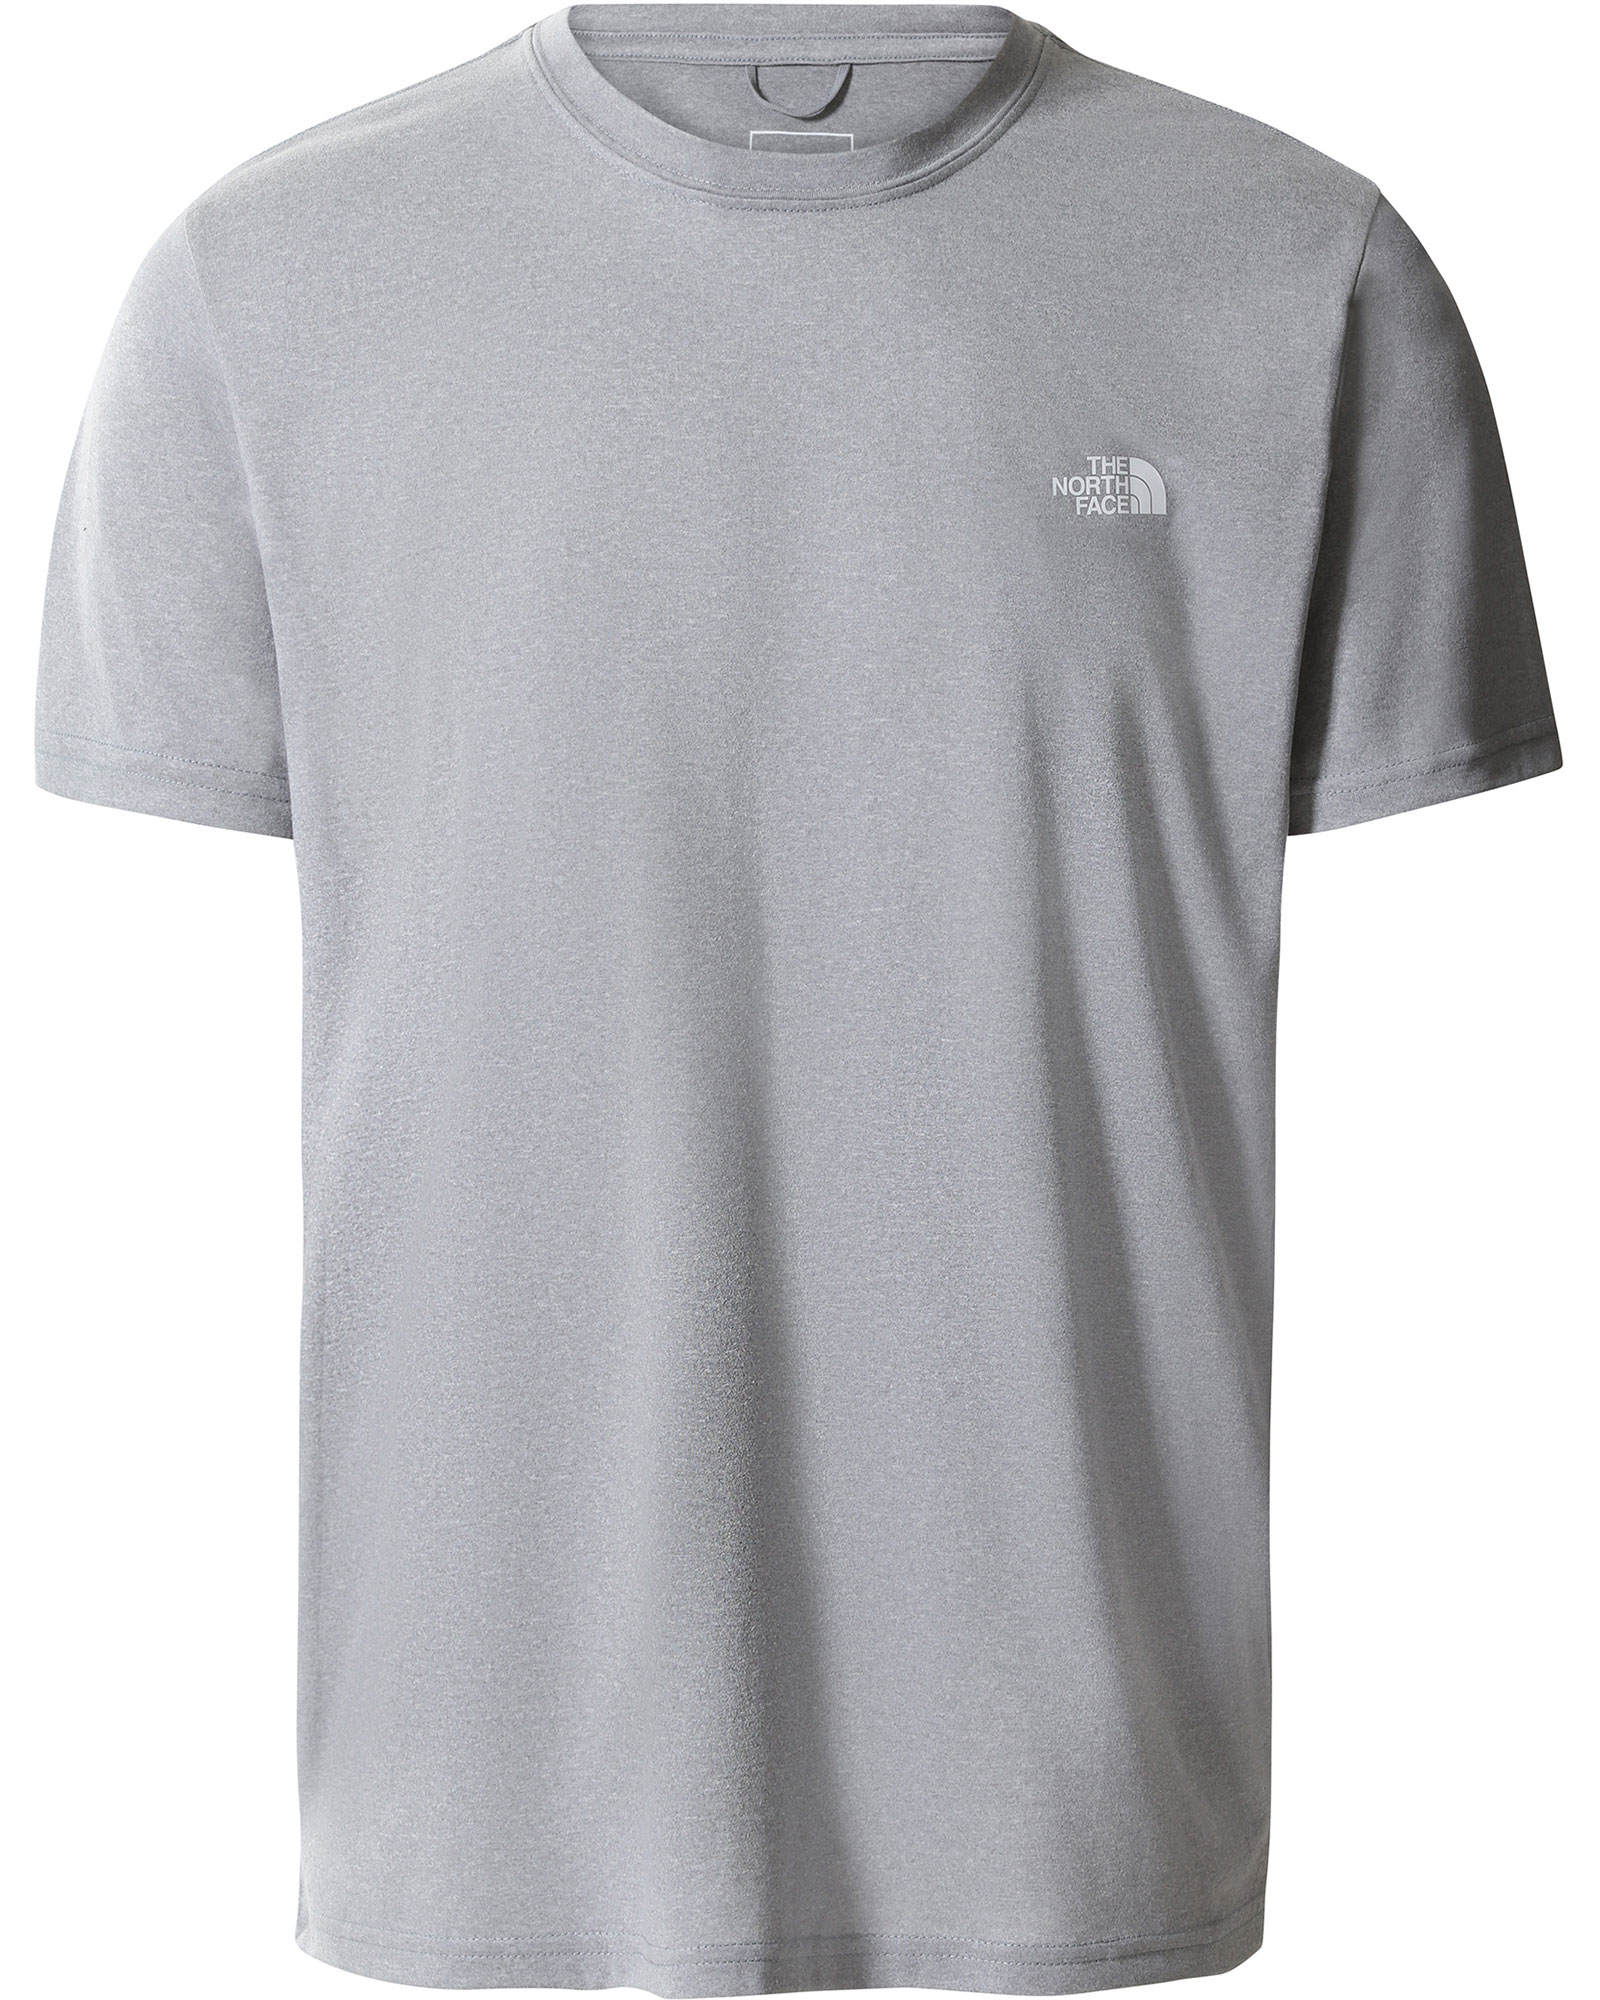 The North Face Reaxion Amp Men’s Crew T Shirt - Mid Grey Heather S